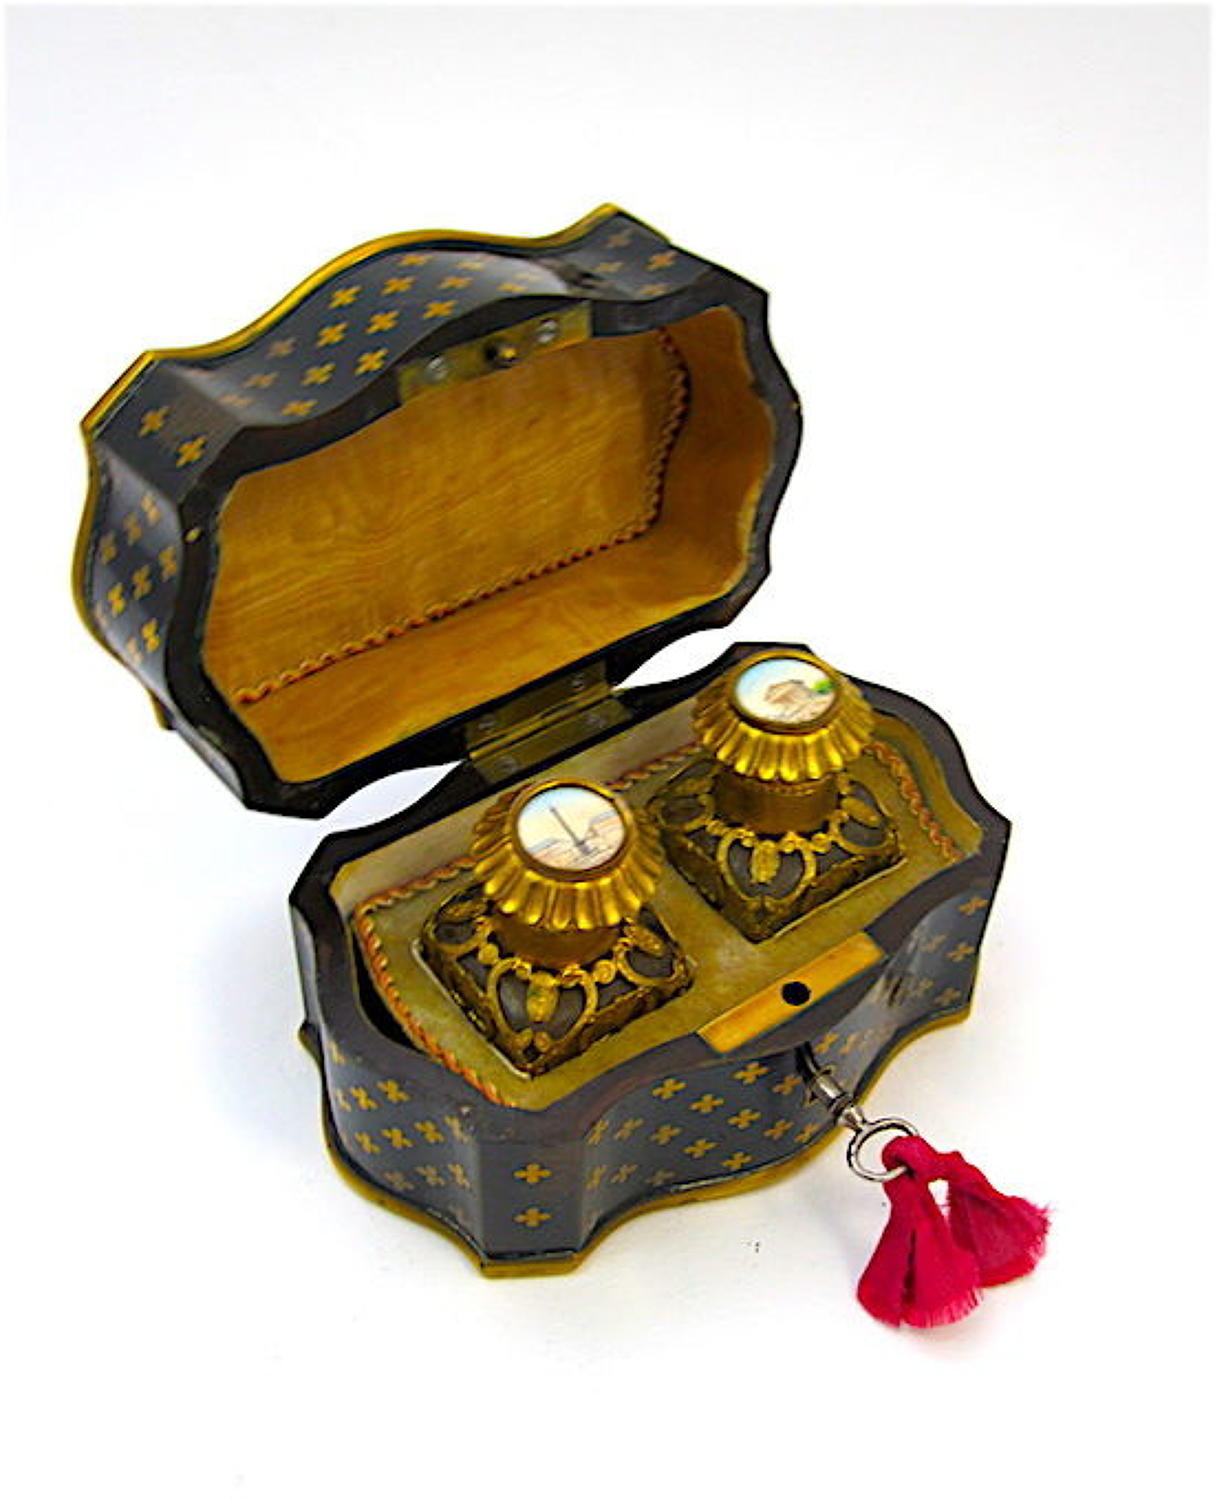 Antique French Box in La Reine Design with 2 Perfume Bottles